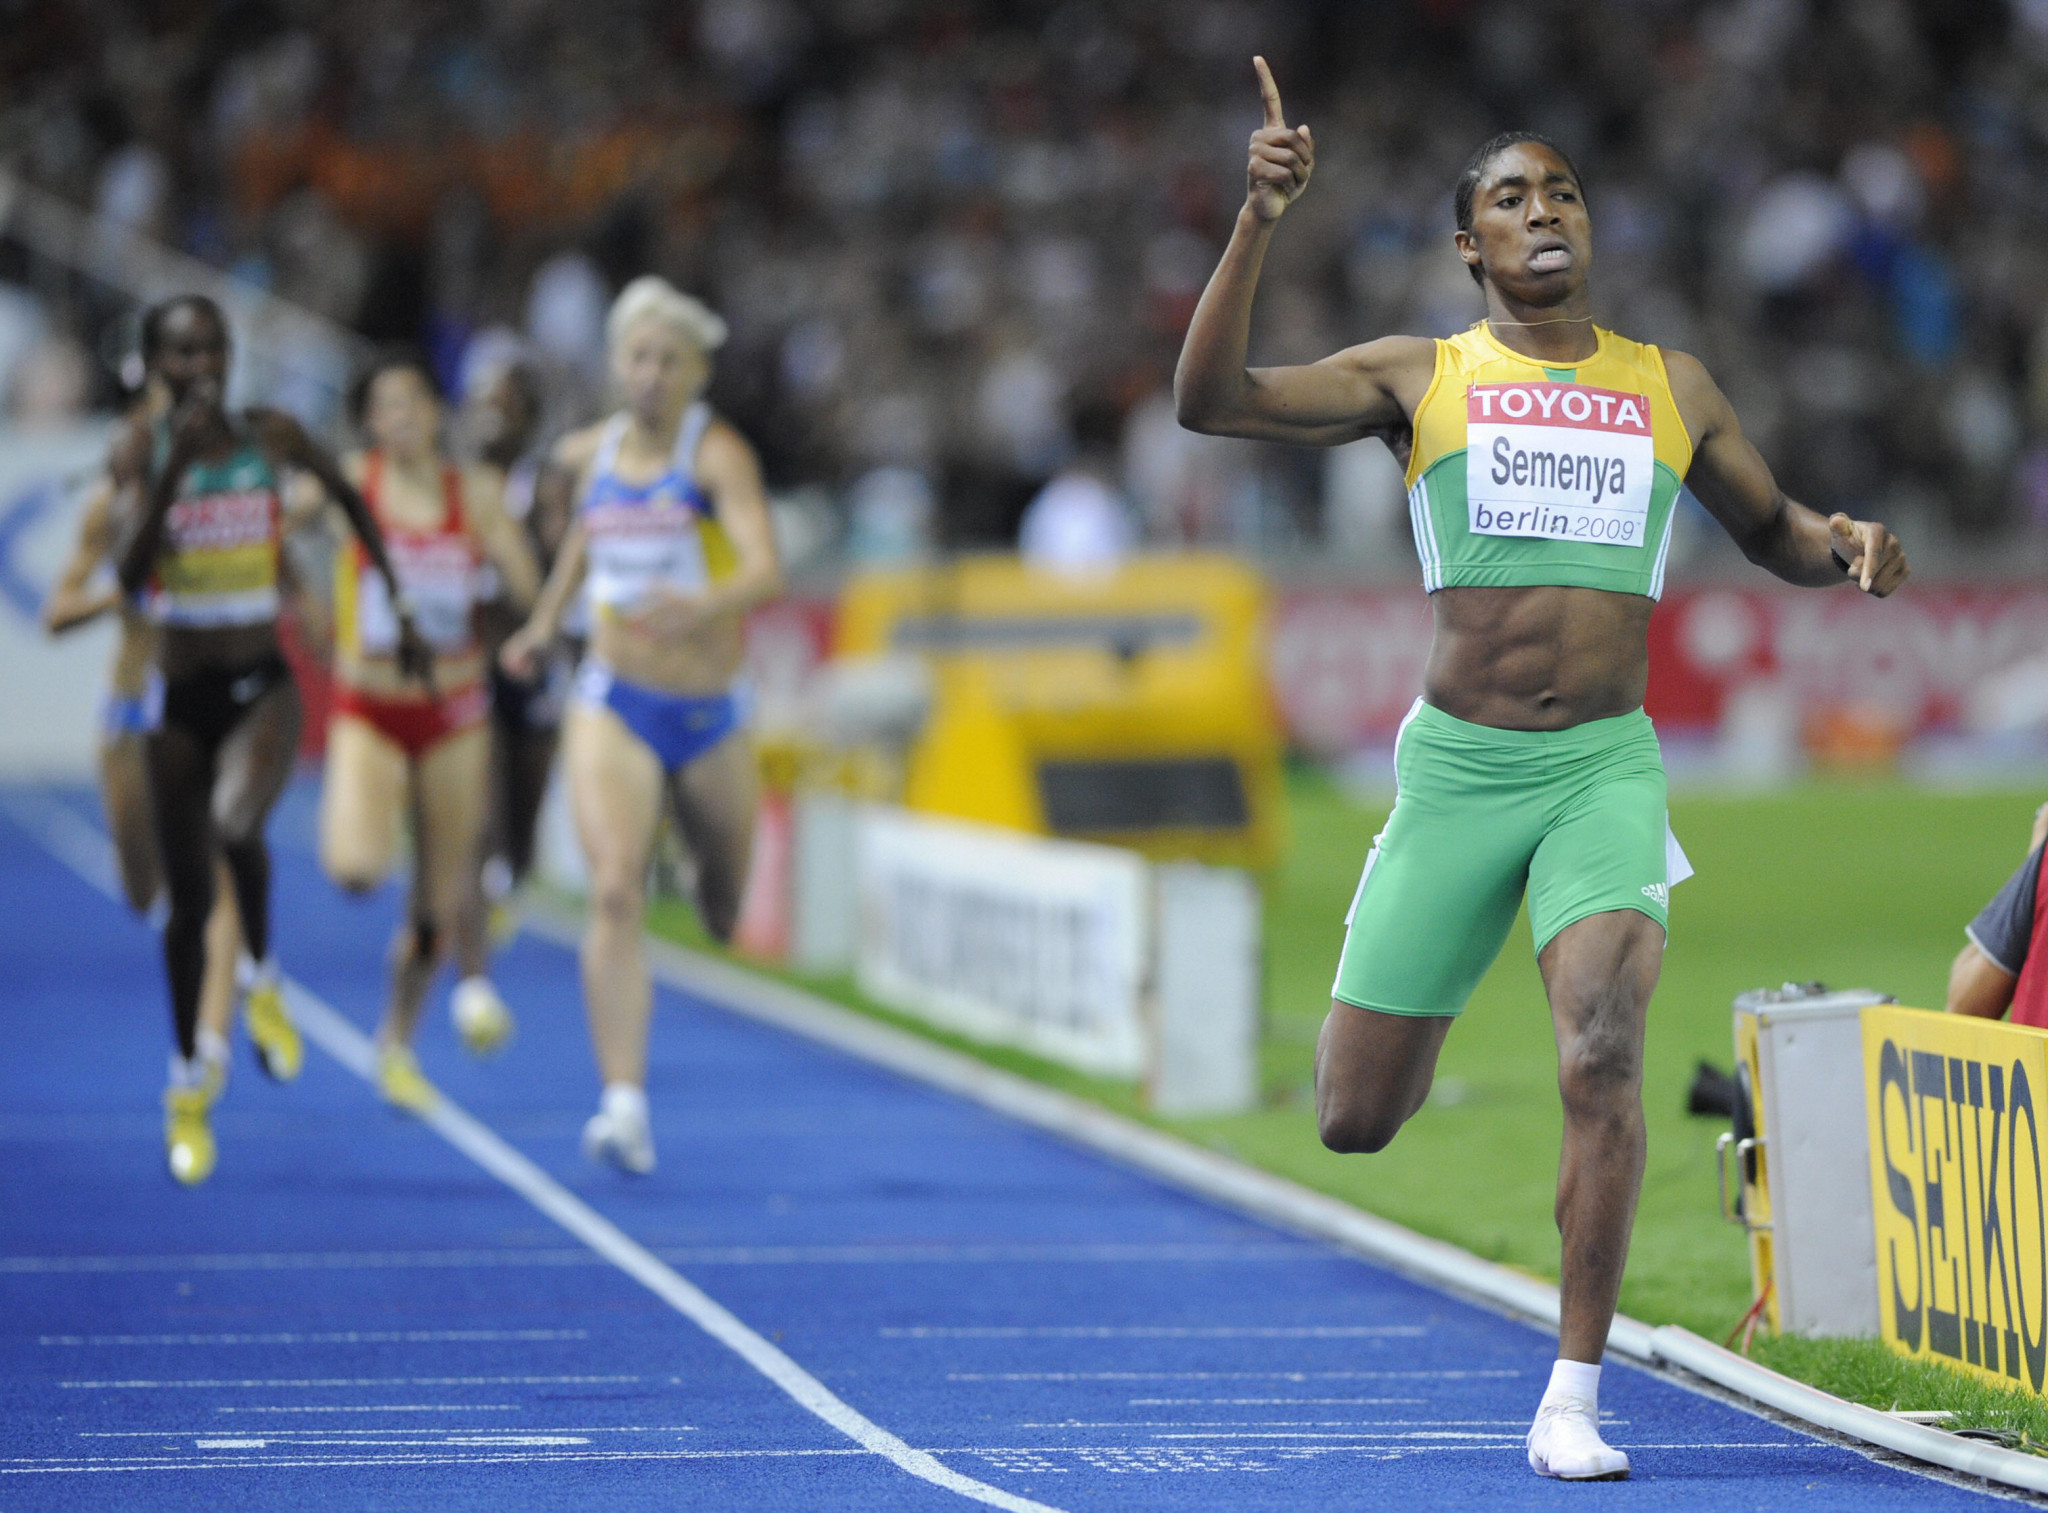 The ability of South Africa's Caster Semenya first came under scrutiny in 2009, when she won the IAAF World Championship 800m title with ease, aged just 18, leading to doubts over her gender ©Getty Images